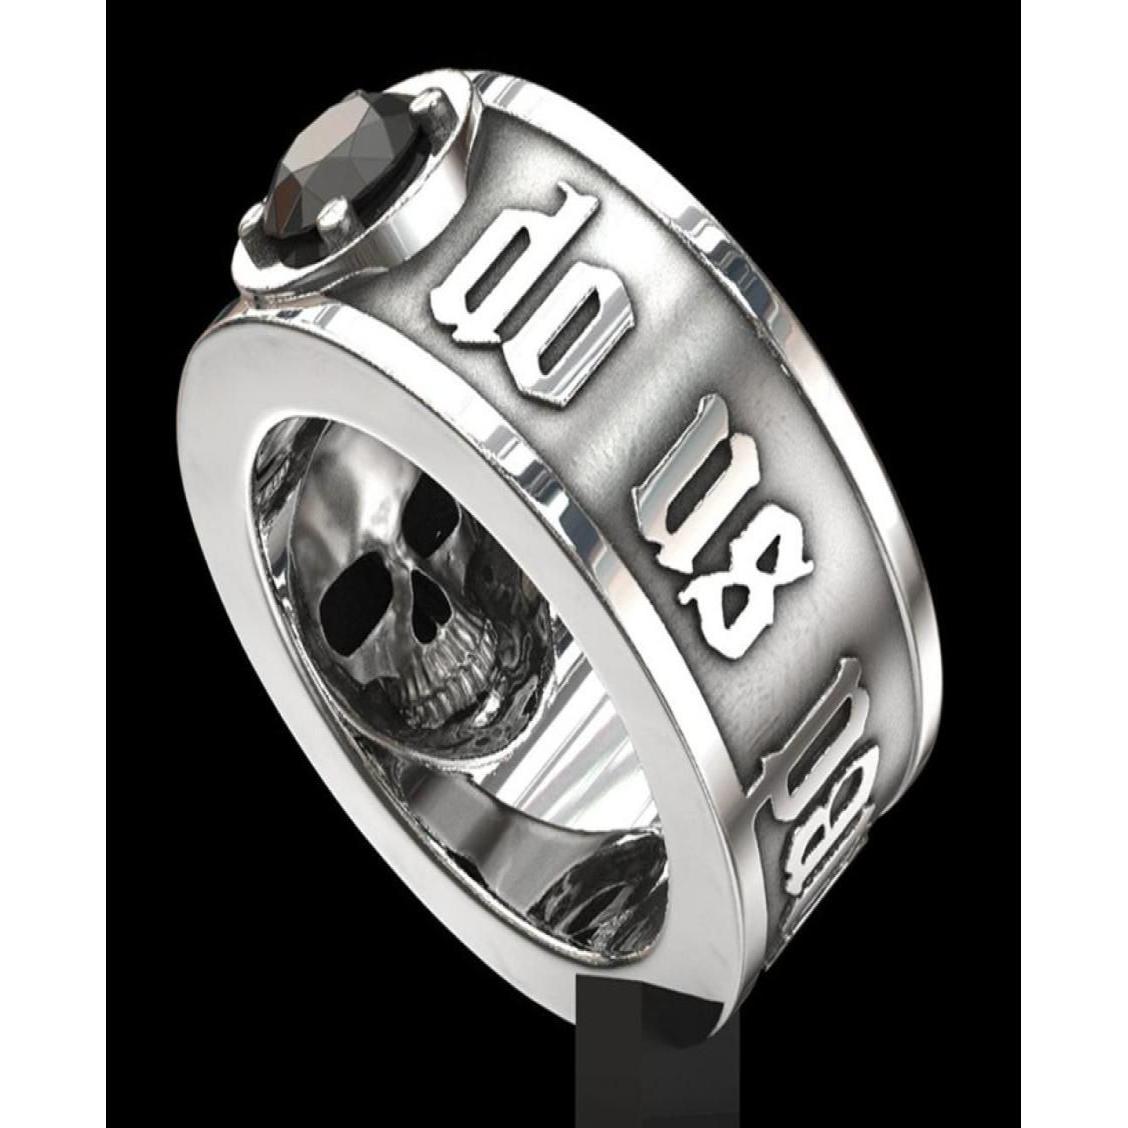 Band Rings 039Till Death Do Us Part039 Stainless Steel Skl Ring Black Diamond Punk Wedding Engagement Jewelry For Men Size 6 1336815 Dhol1